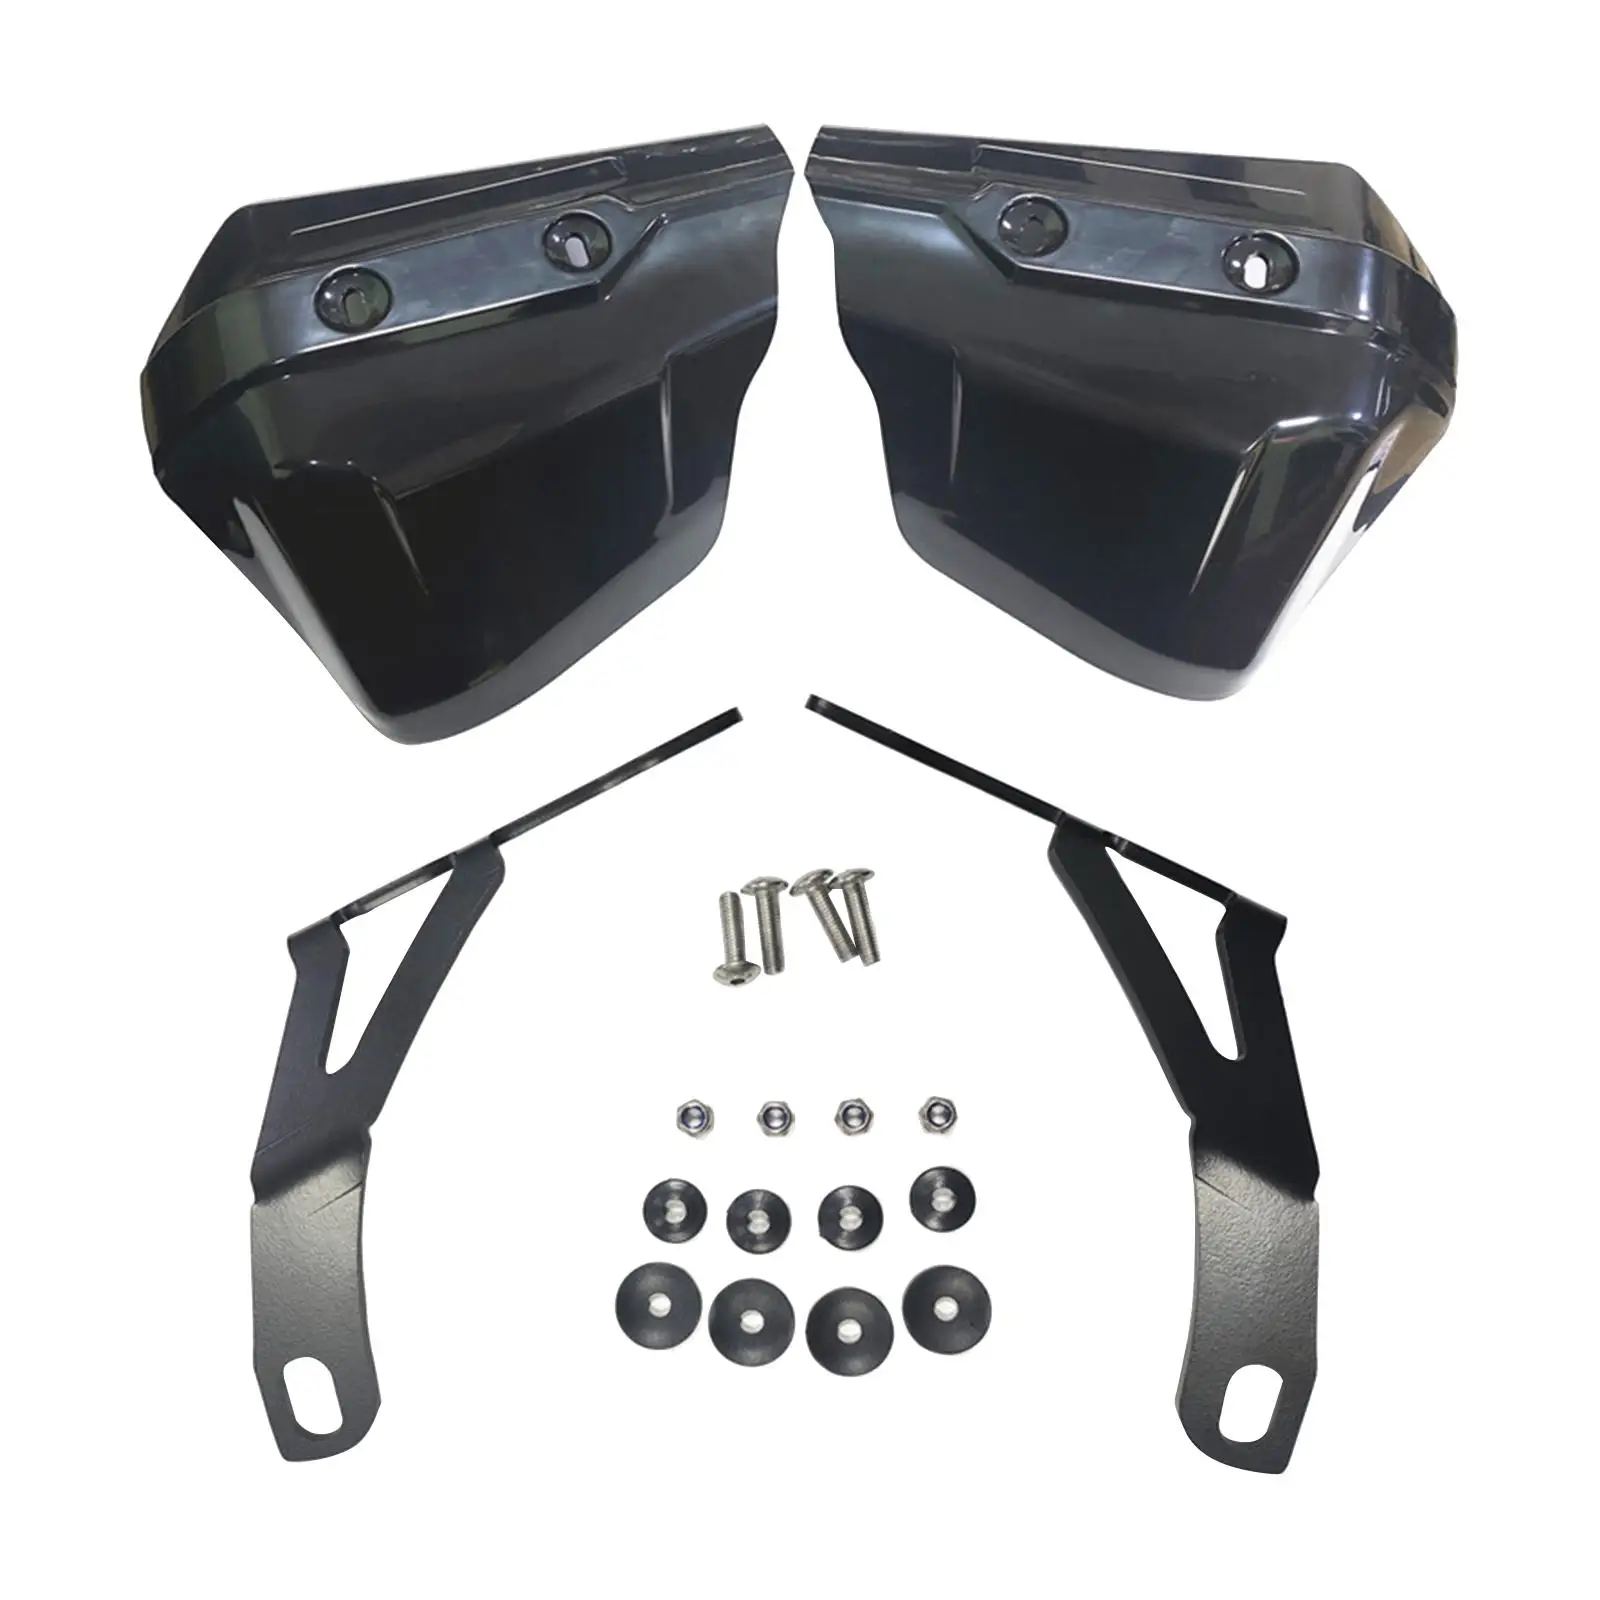 2 Pieces Motorcycle Hand Guards Wind Protector Touring Hardware Replaces